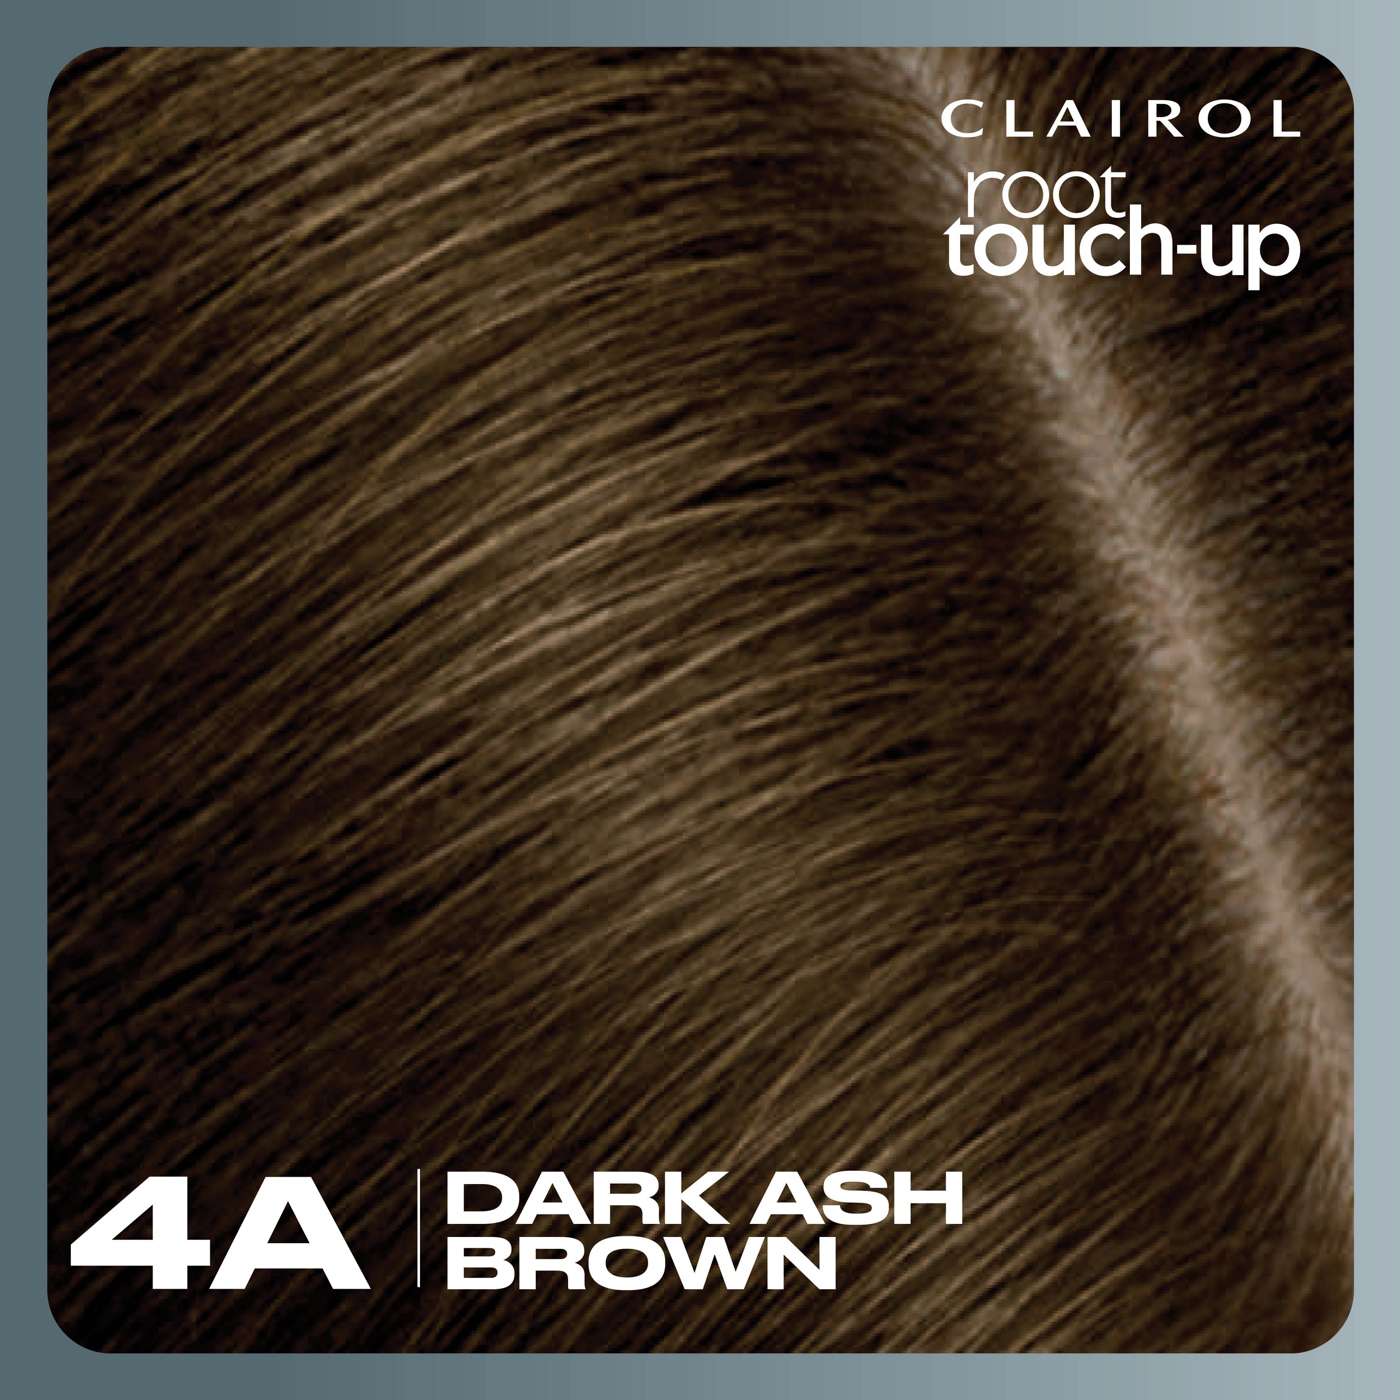 Clairol Nice 'N Easy Root Touch Up Hair Color - 4A Dark Ash Brown; image 8 of 10